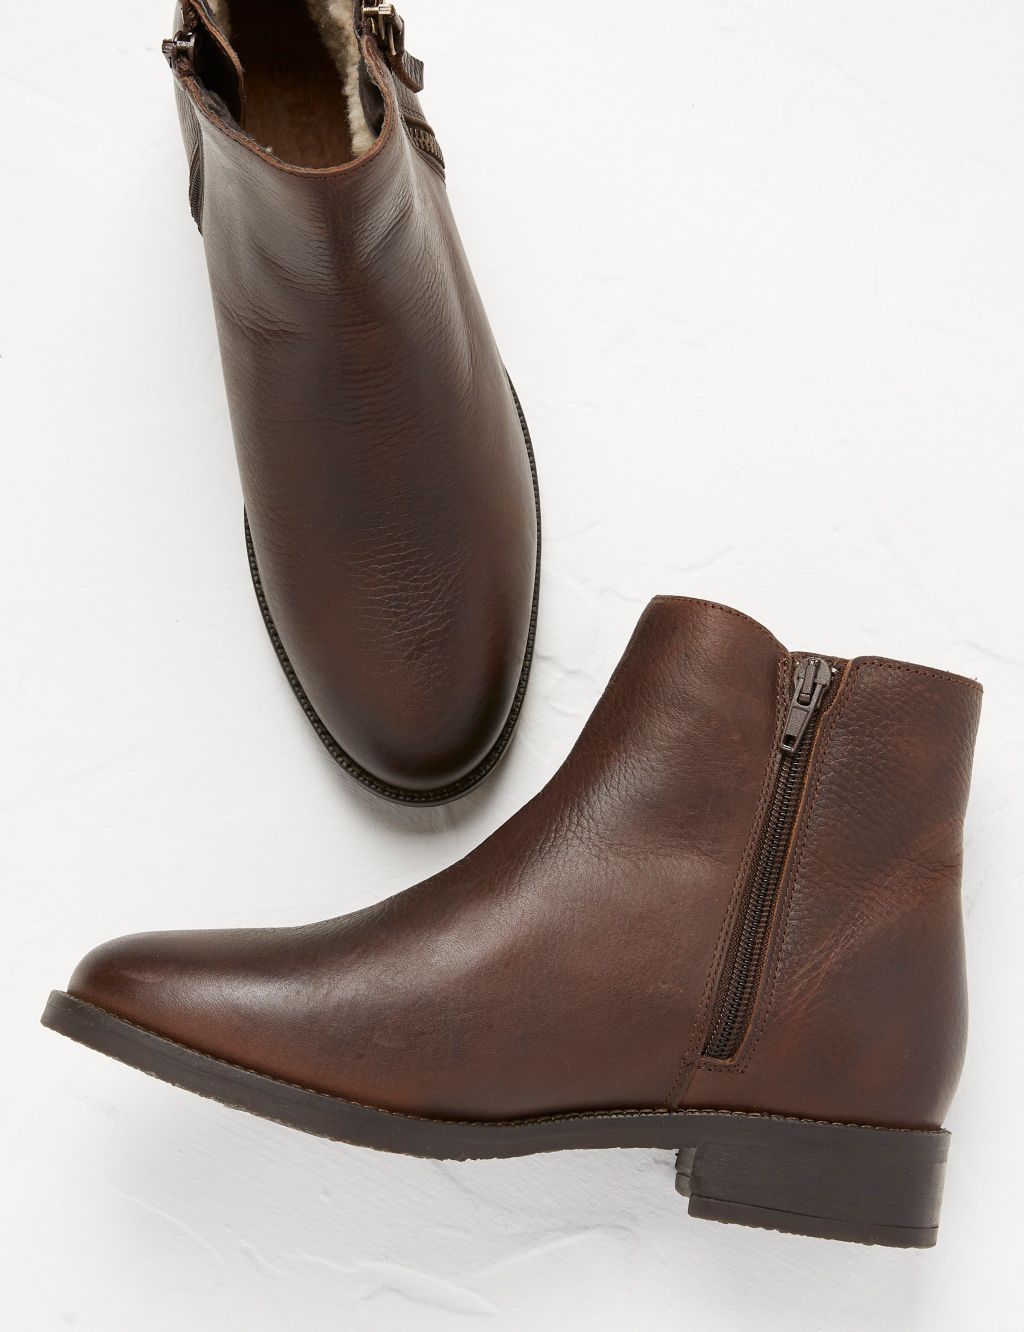 Leather Flat Ankle Boots image 3